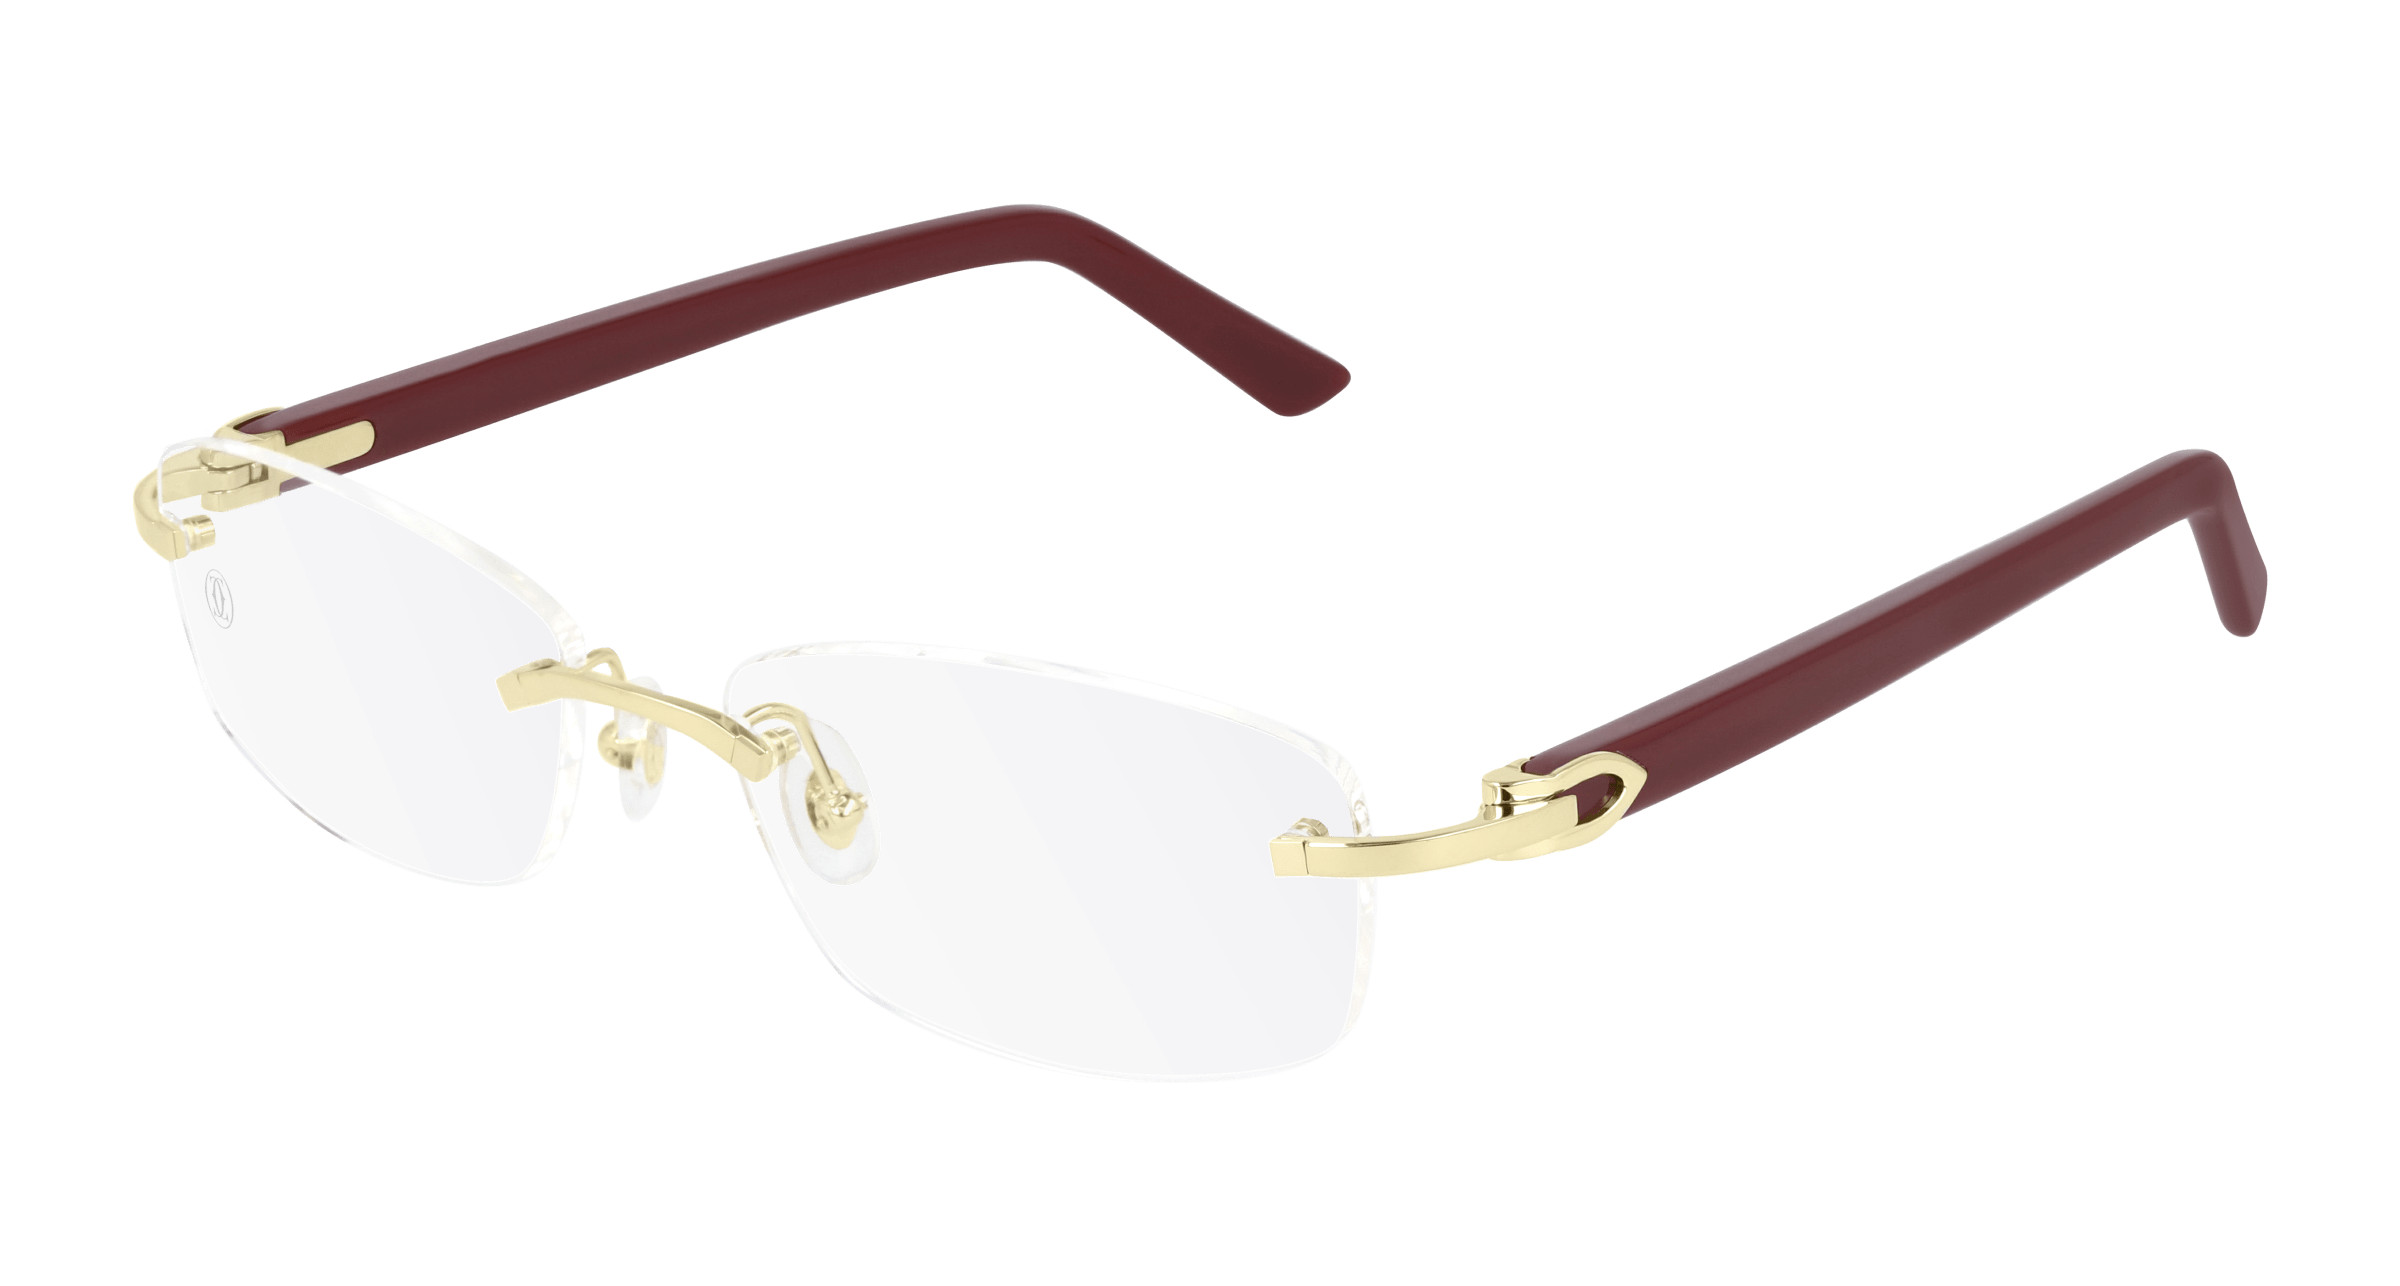 Black and Gold Cartier Rimless Glasses | Cartier CT0048O Glasses | coolframes.co.uk